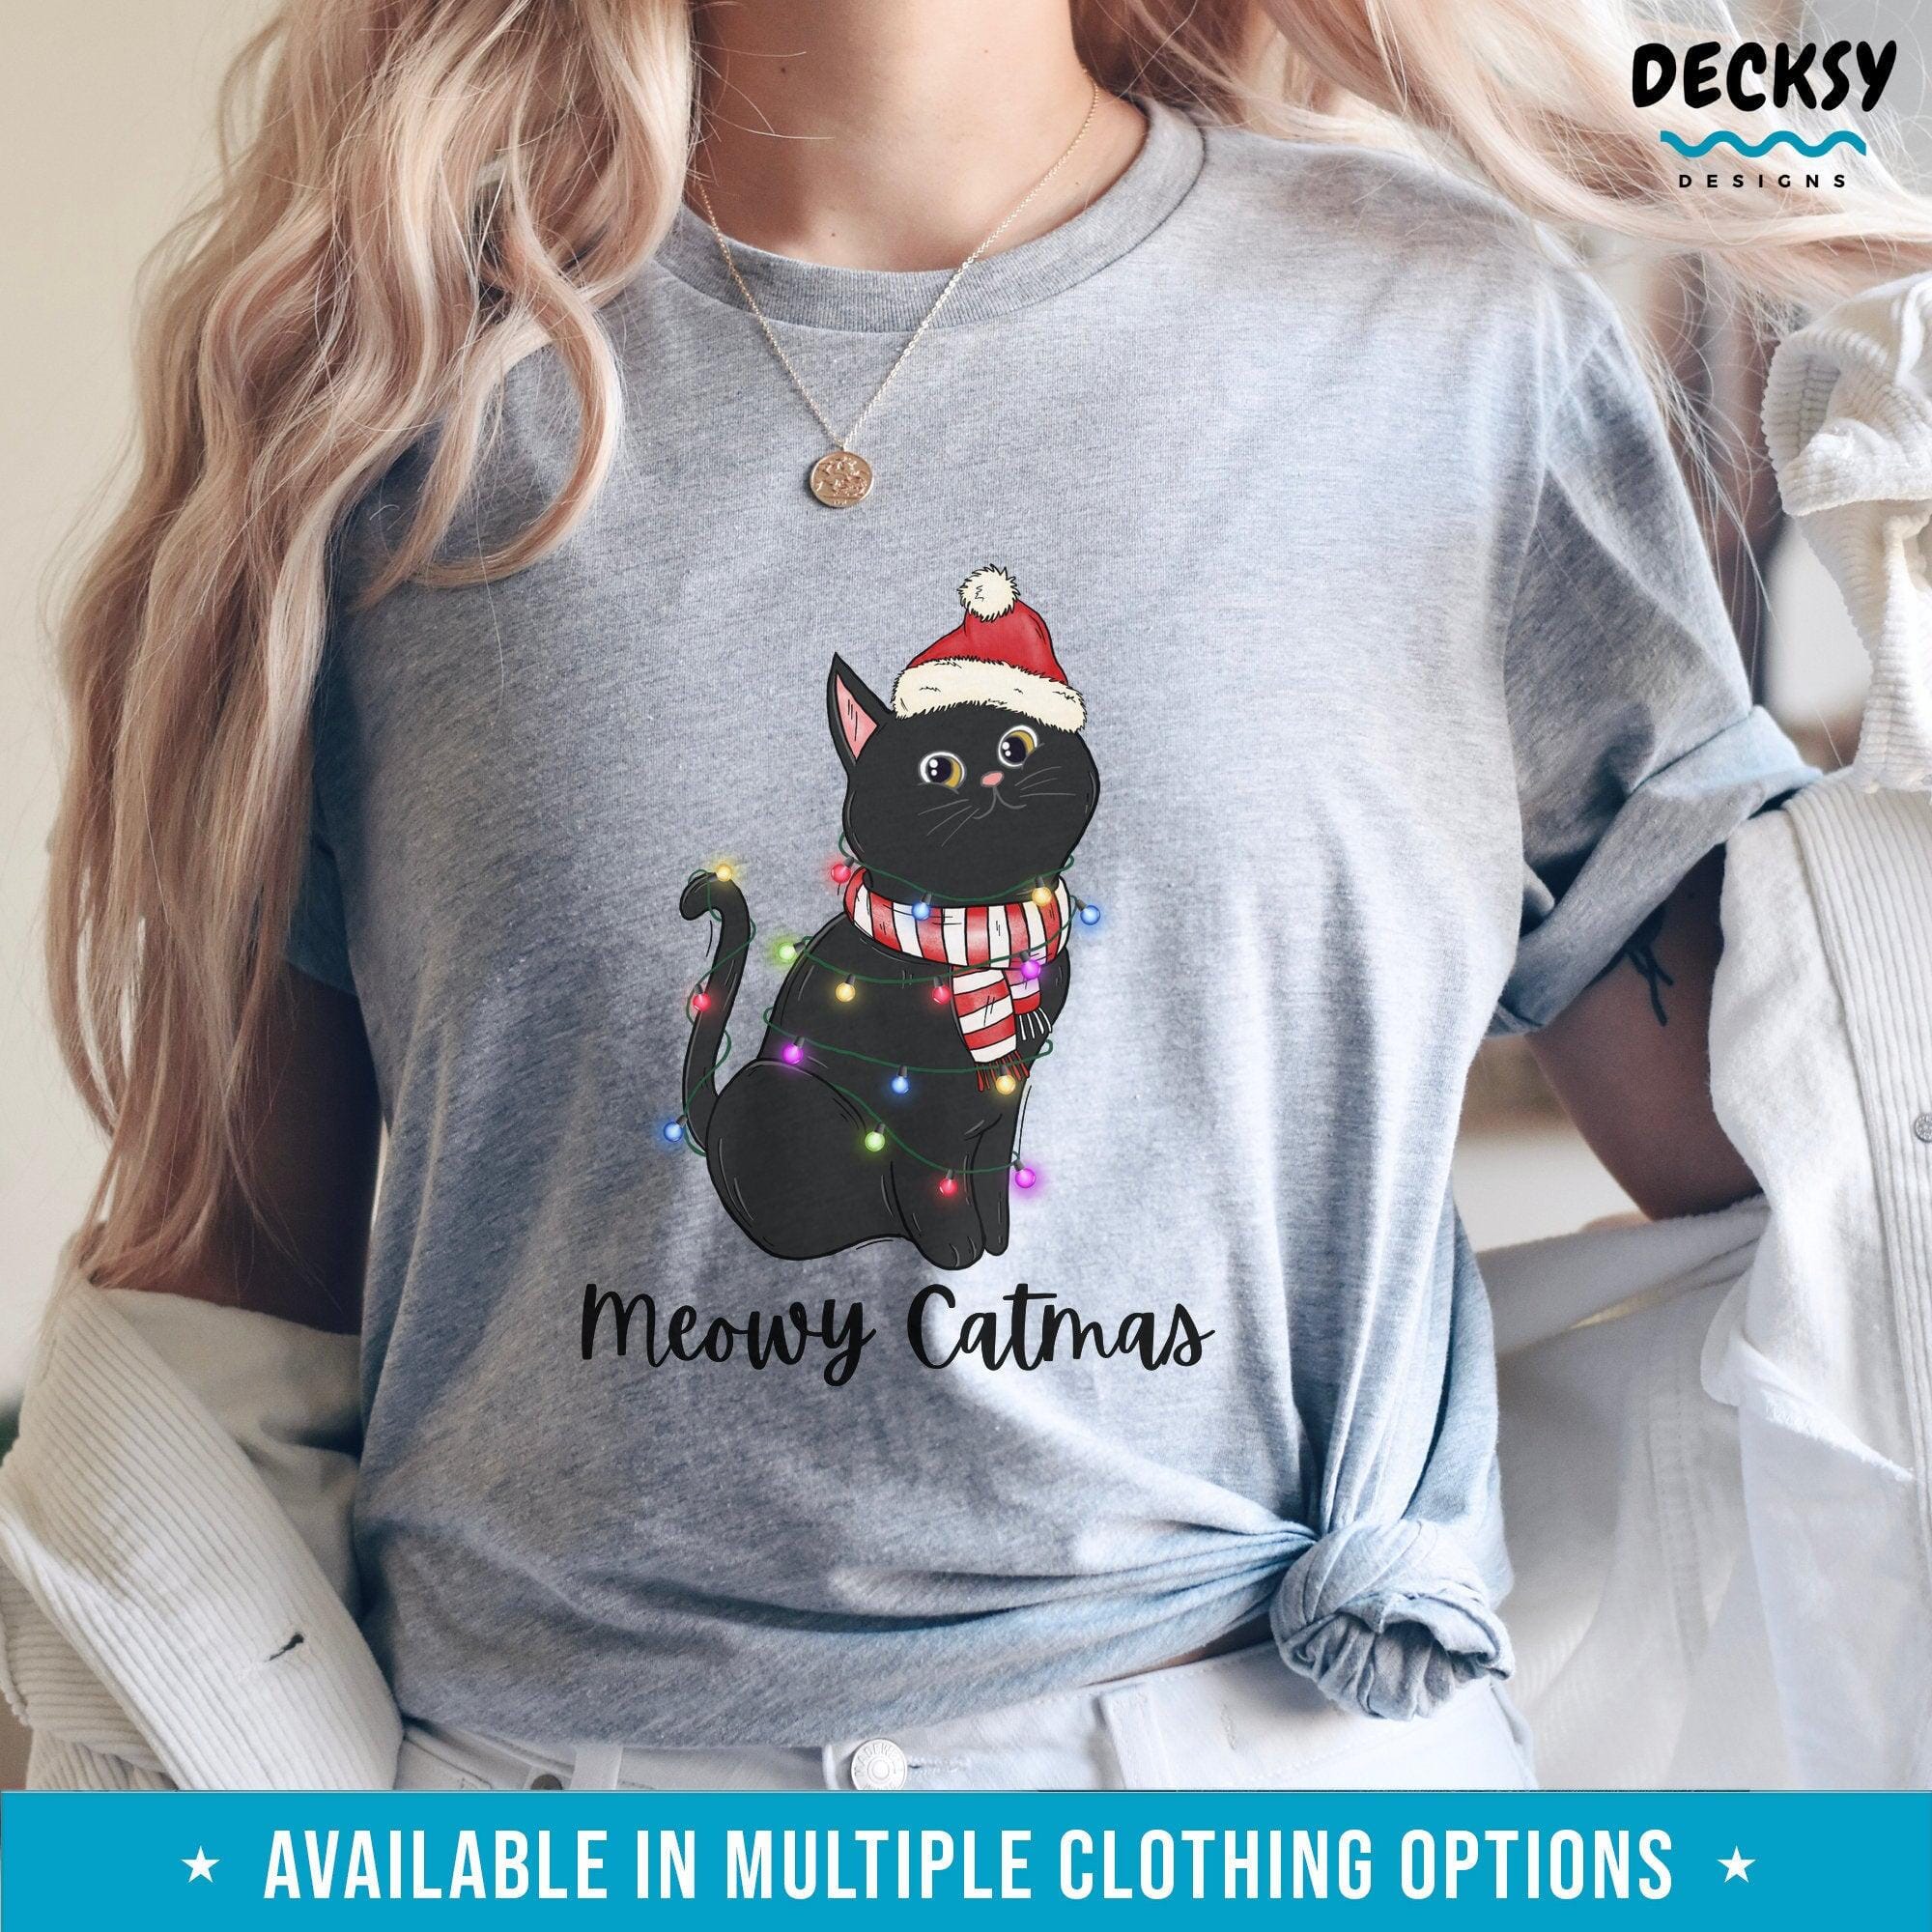 Meowy Catmas Shirt, Christmas Cat Gift-Clothing:Gender-Neutral Adult Clothing:Tops & Tees:T-shirts:Graphic Tees-DecksyDesigns